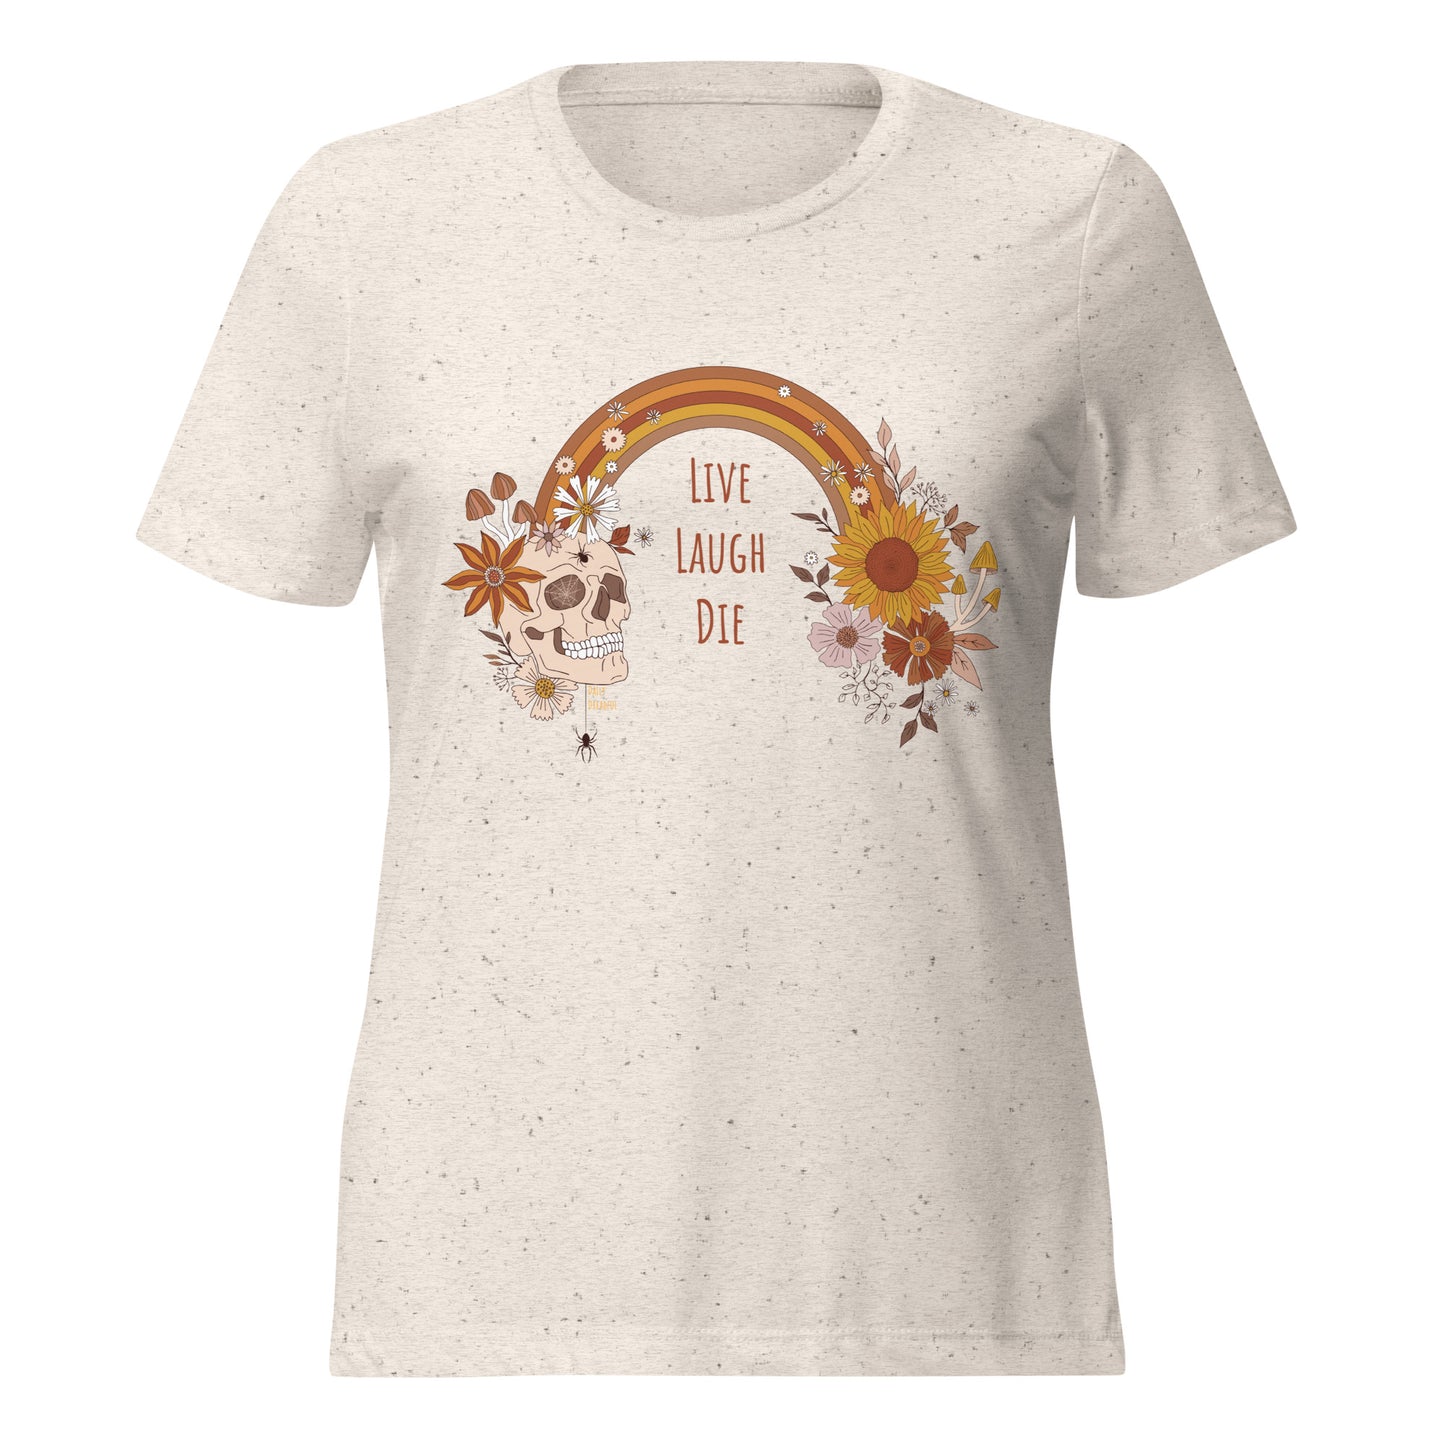 "Live, Laugh, Die" relaxed tri-blend t-shirt, oatmeal colored tee